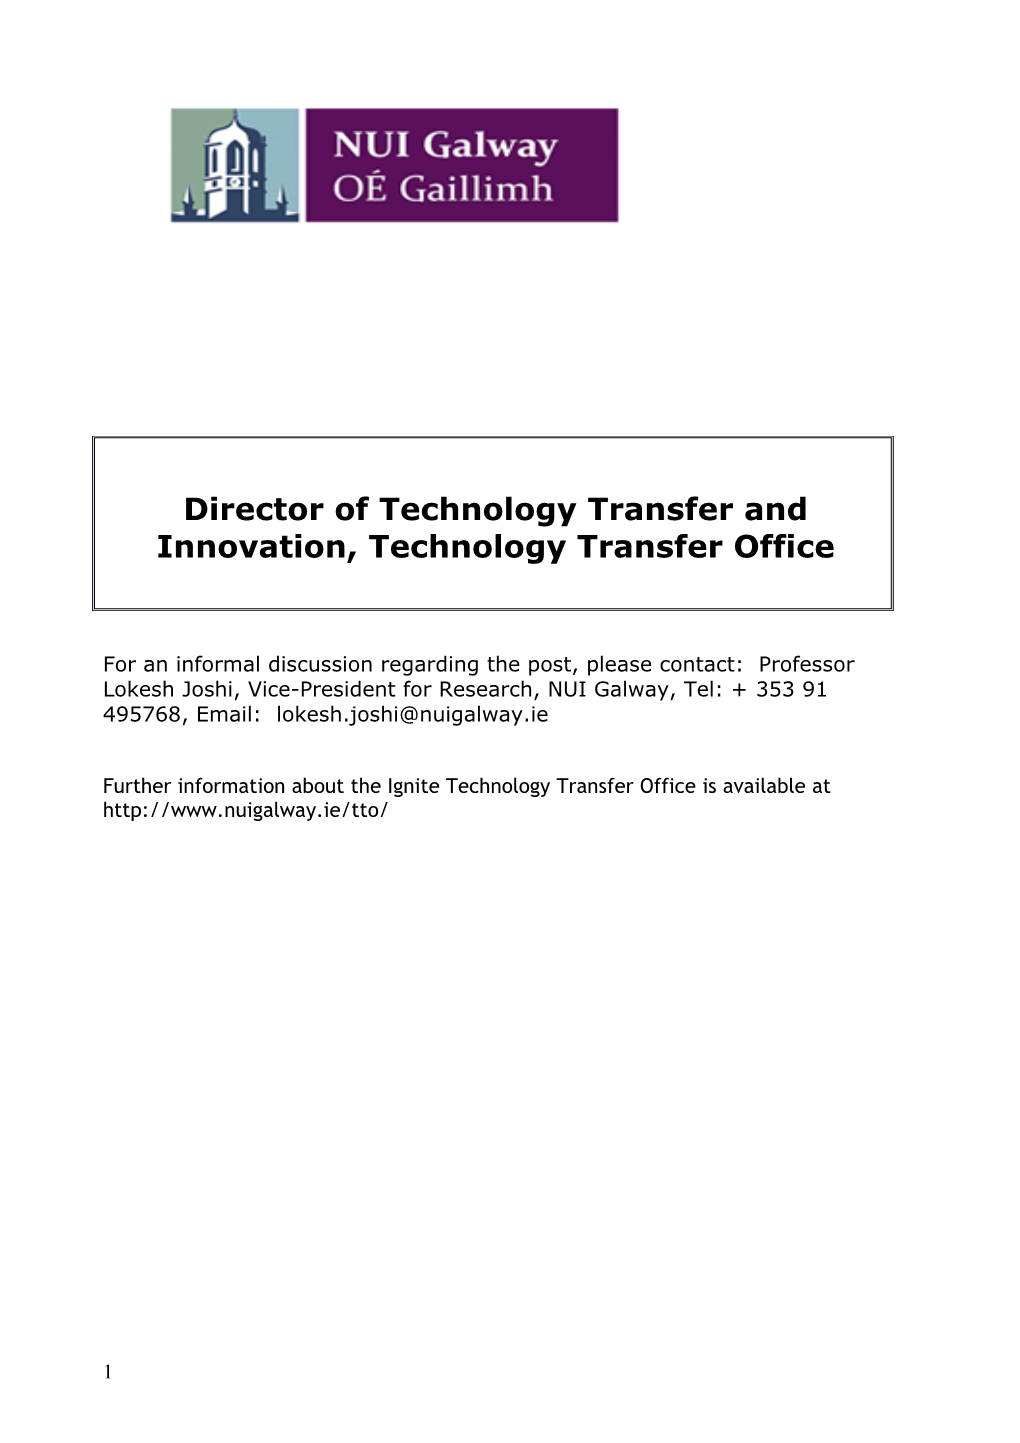 Further Information About the Ignite Technology Transfer Office Is Available At